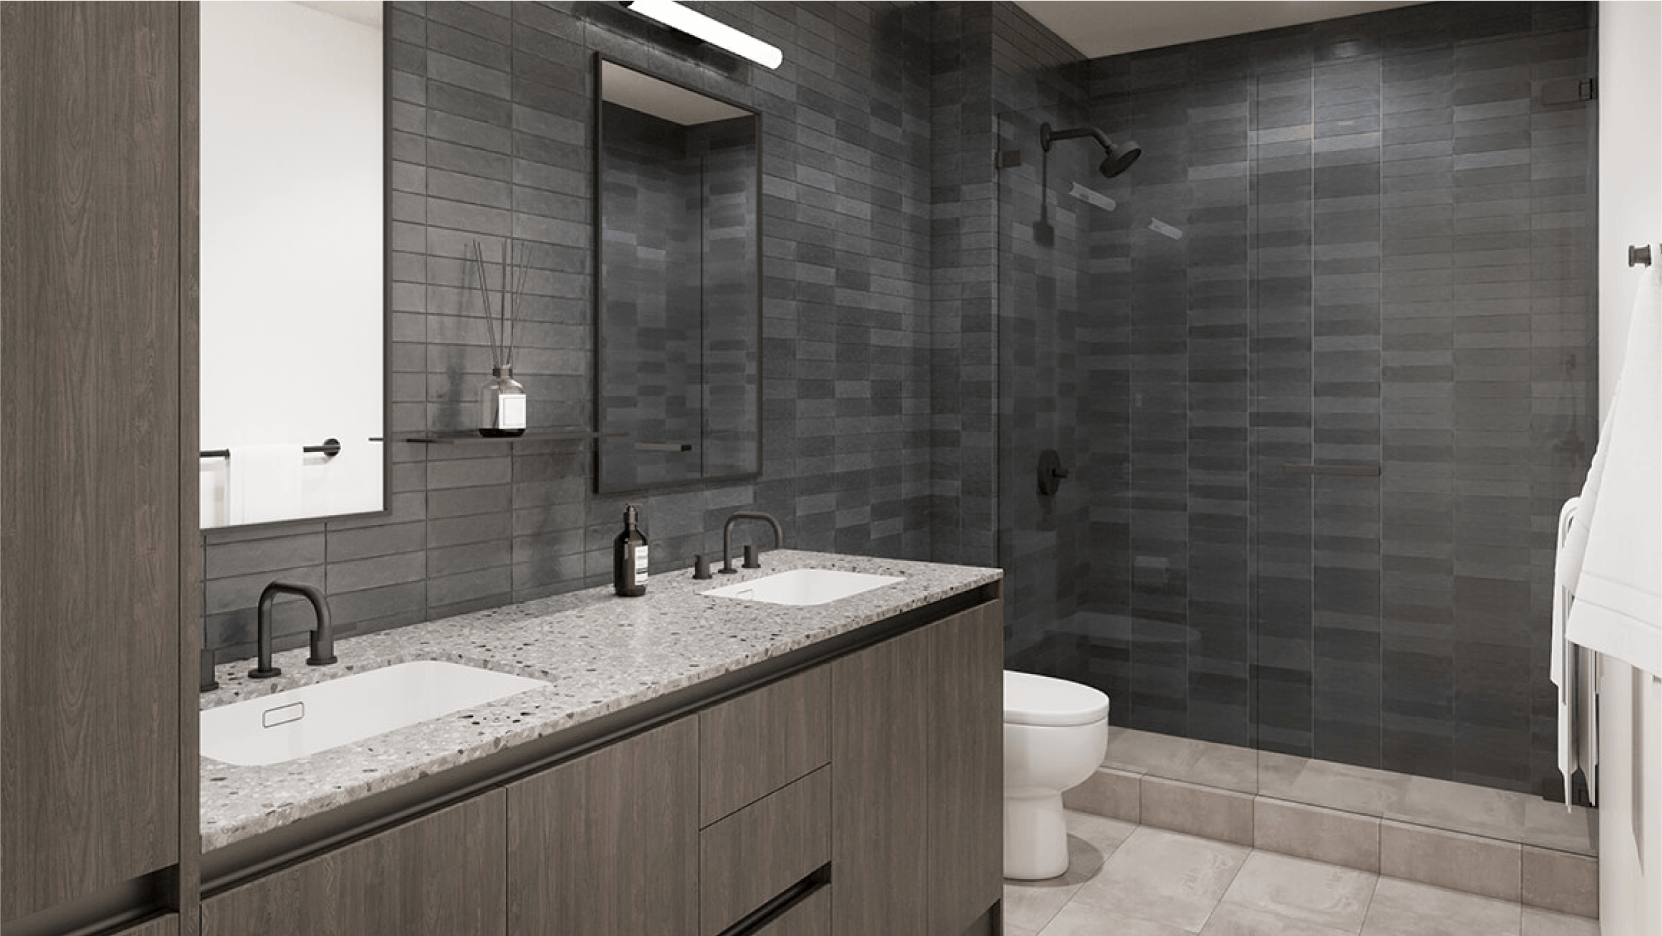 Elegant modern bathroom at Vesper ATX featuring dark grey tiles, a spacious glass-enclosed shower area, a large mirror over a double sink vanity with matte black fixtures, and a terrazzo countertop, providing a contemporary look.